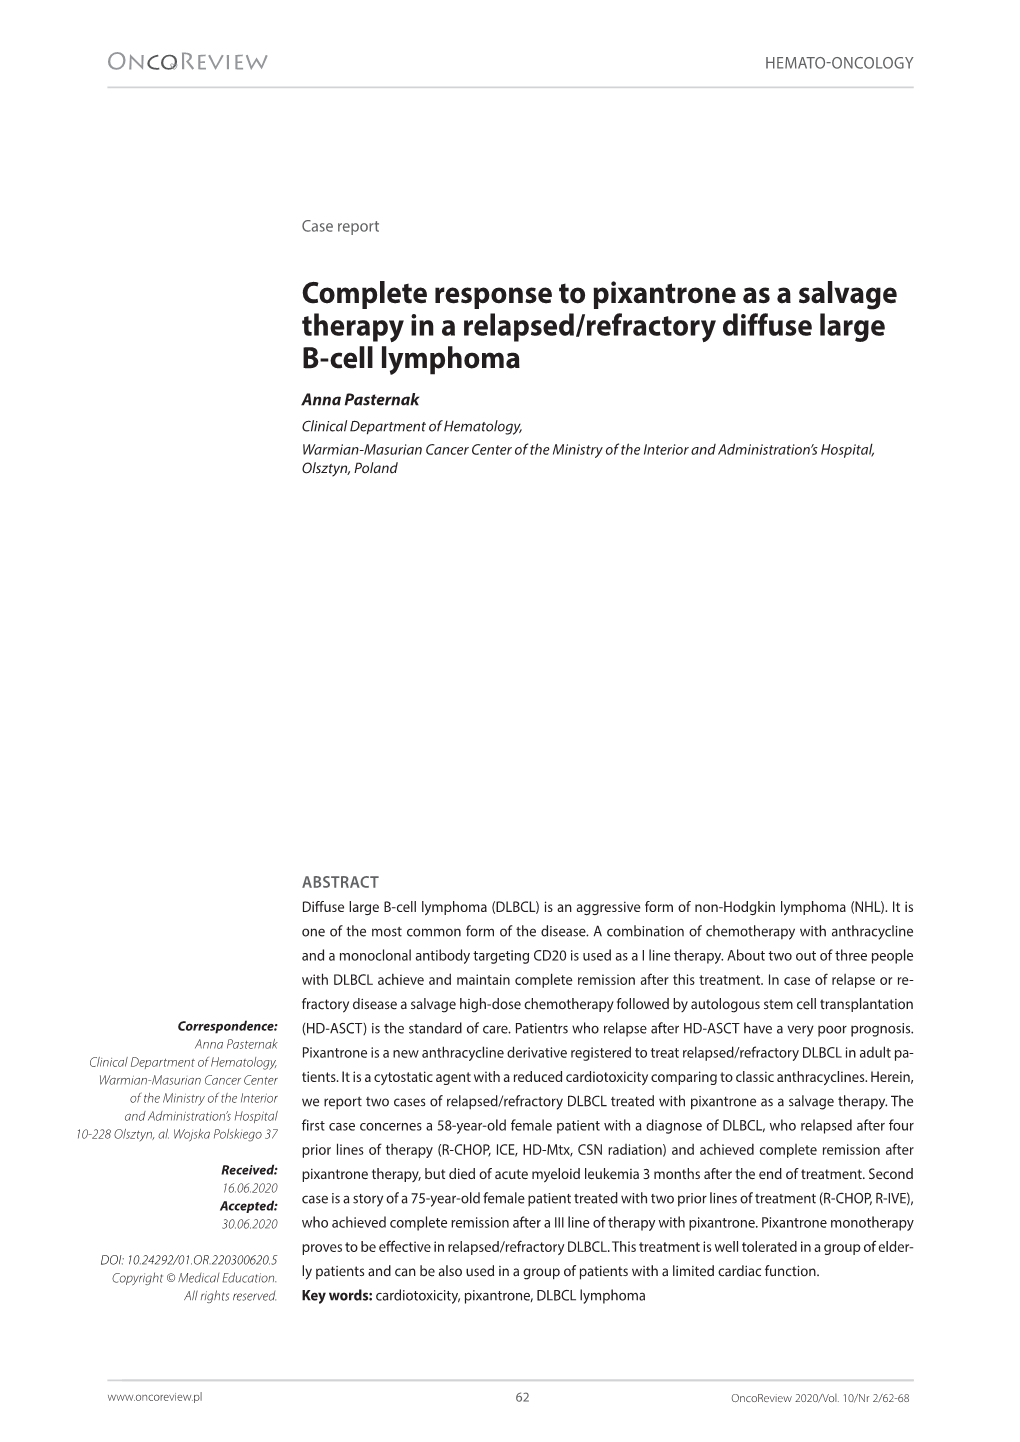 Complete Response to Pixantrone As a Salvage Therapy in a Relapsed